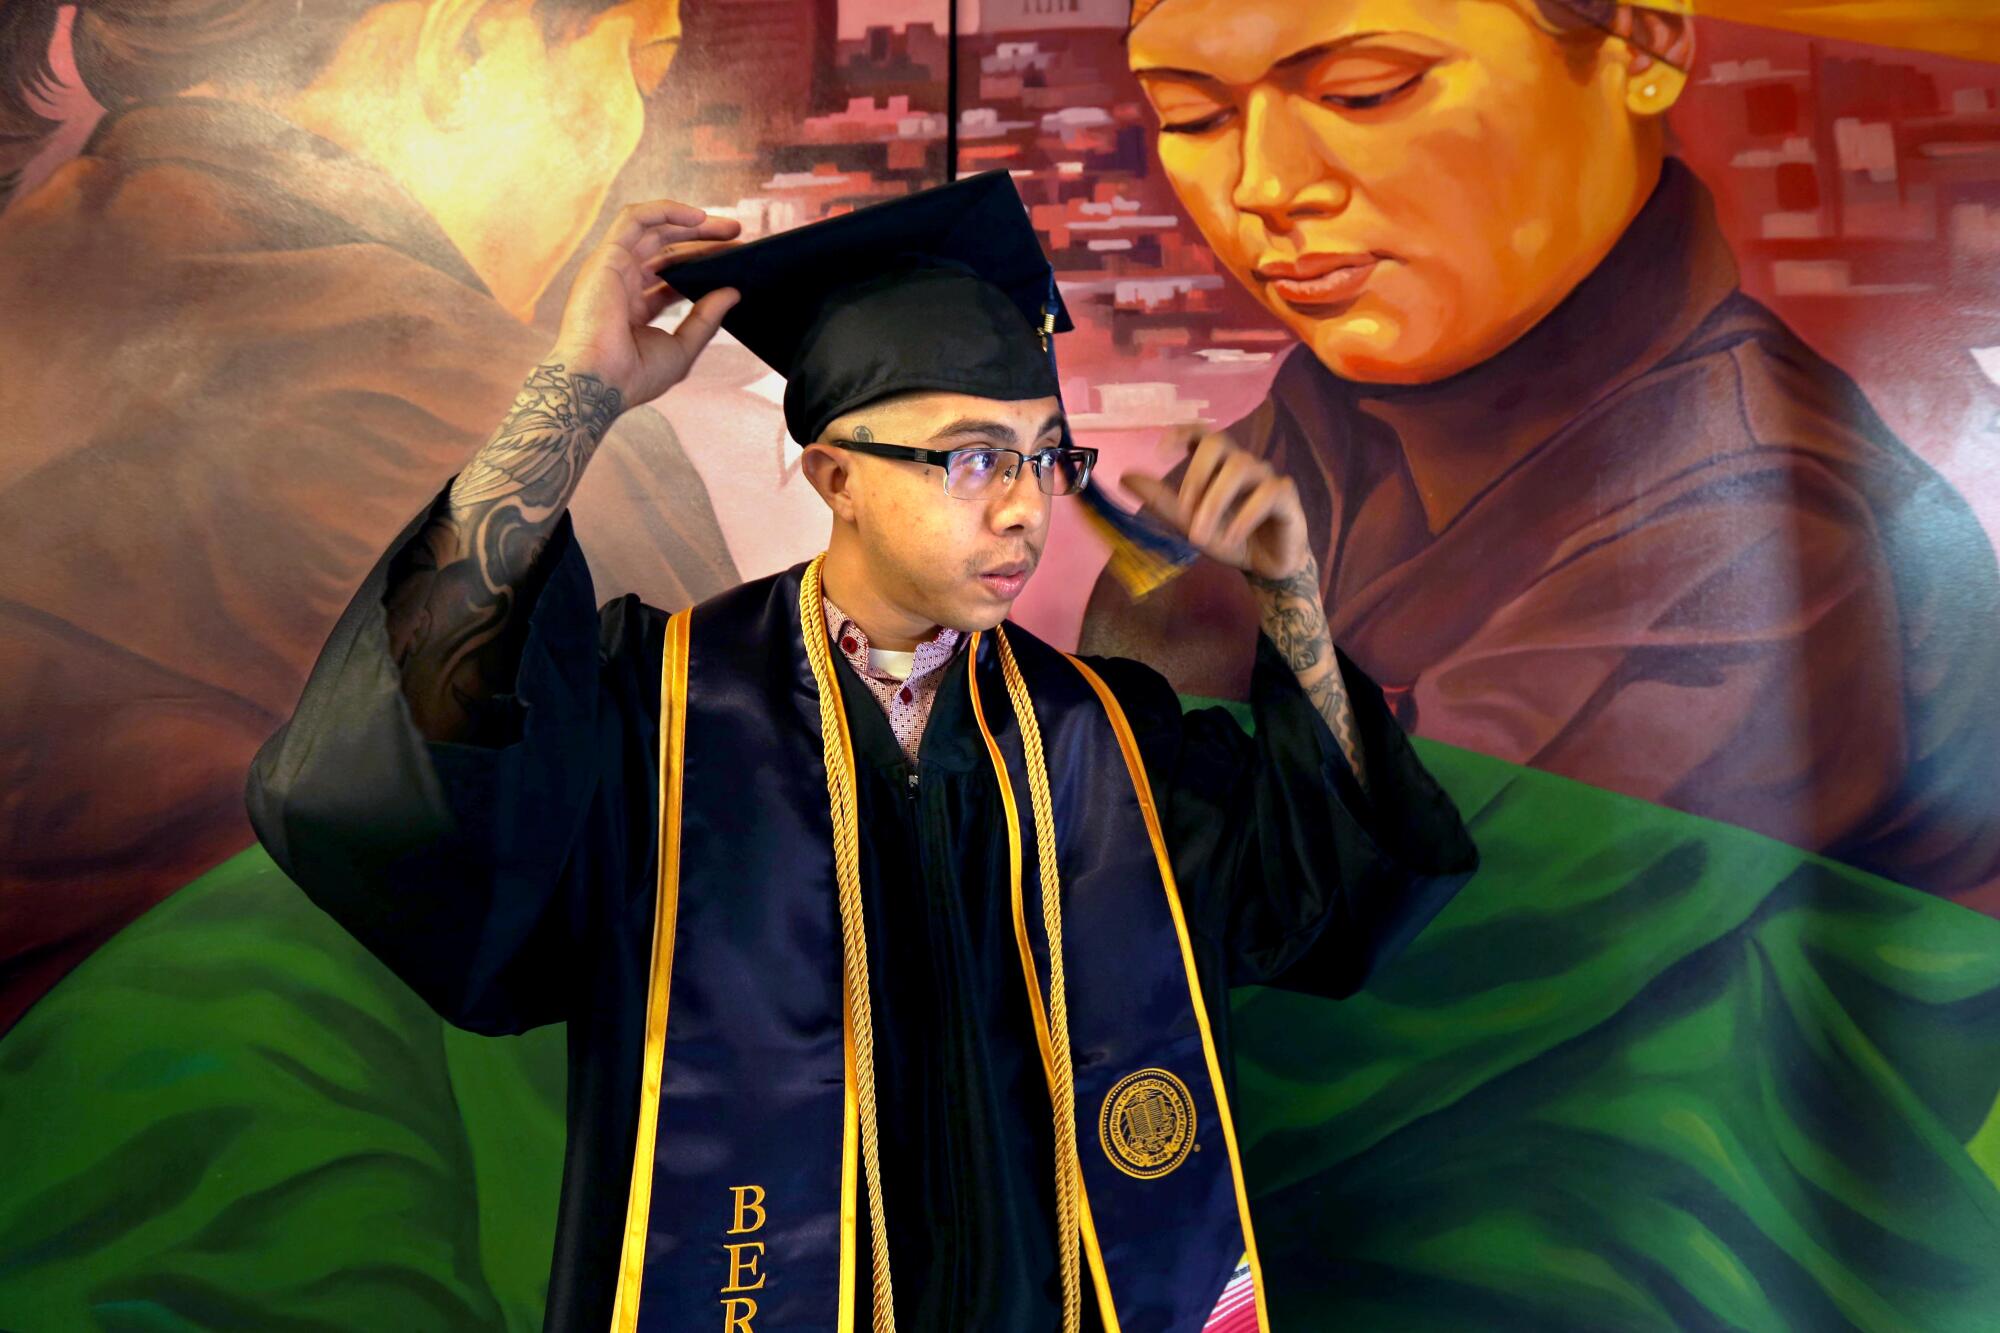 A student standing in front of a large mural adjusts his graduation cap.